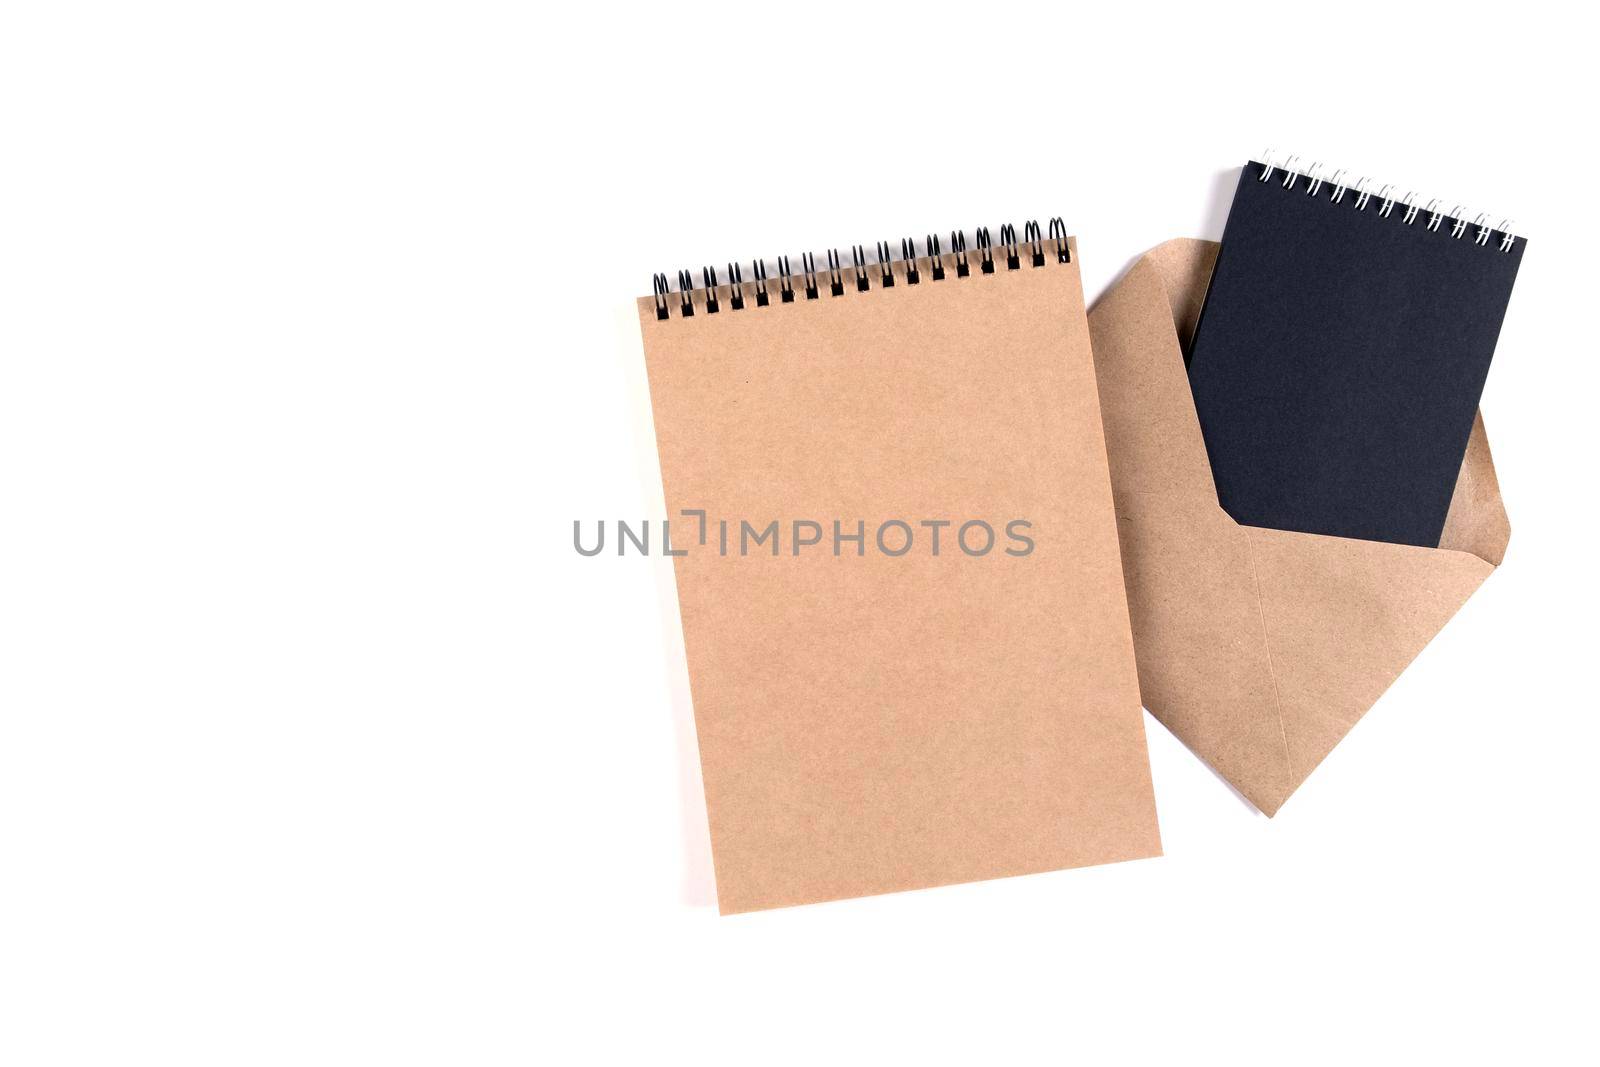 Blank spiral notepads and a recycled envelope stacked on a white background. Education, office, environmental protection, zero waste.